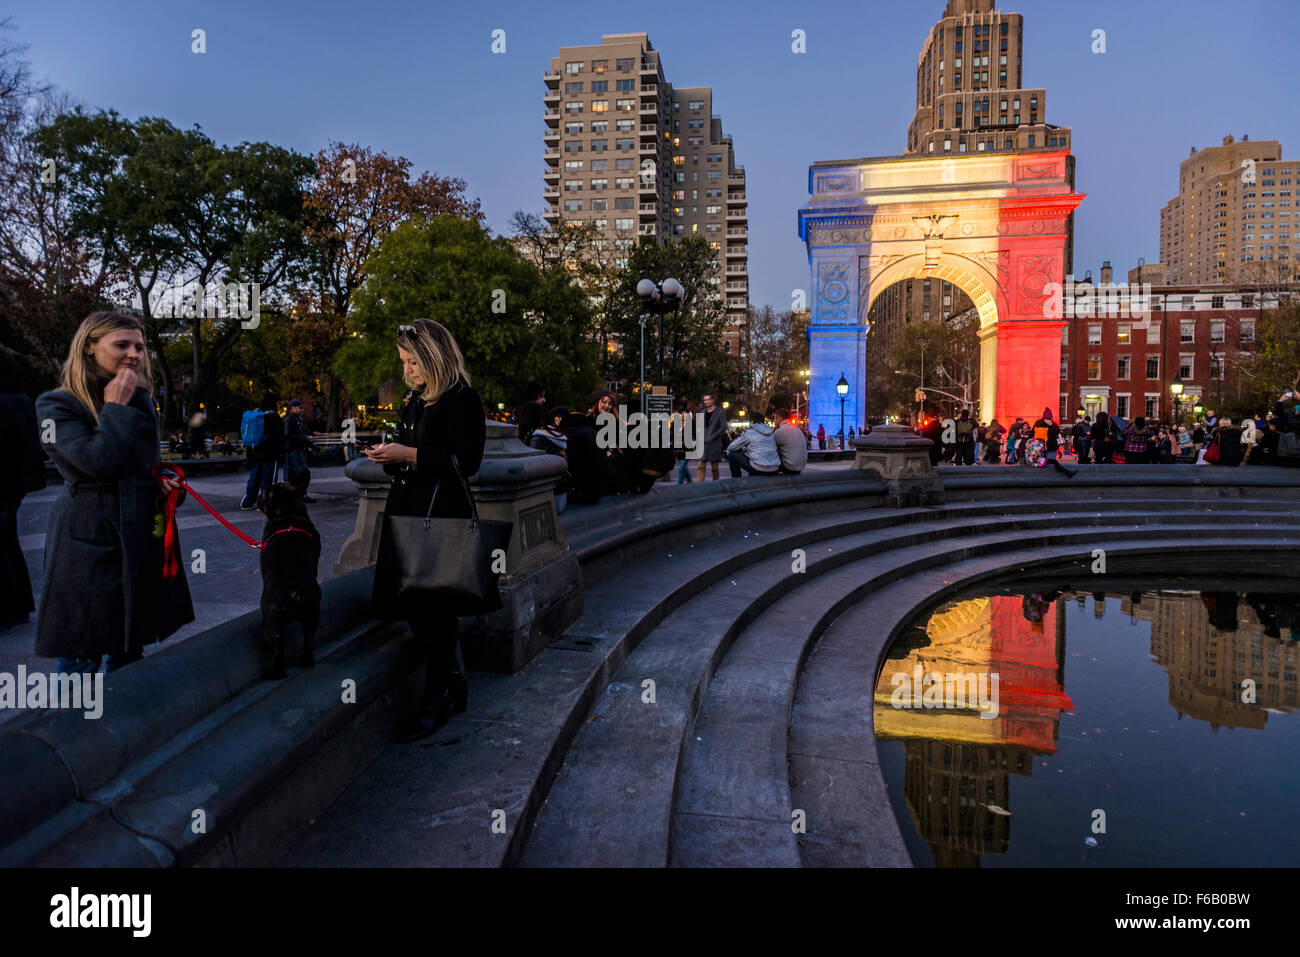 New York, NY - 15 November 2015 NYC  The arch in Washington Square Park alights up in solidarity with Paris.  Beneath the arch is a candlelight shrine to commemorate the victims of the 13 November Paris terror attacks. Credit: Stacy Walsh Rosenstock/Alamy Live News Stock Photo